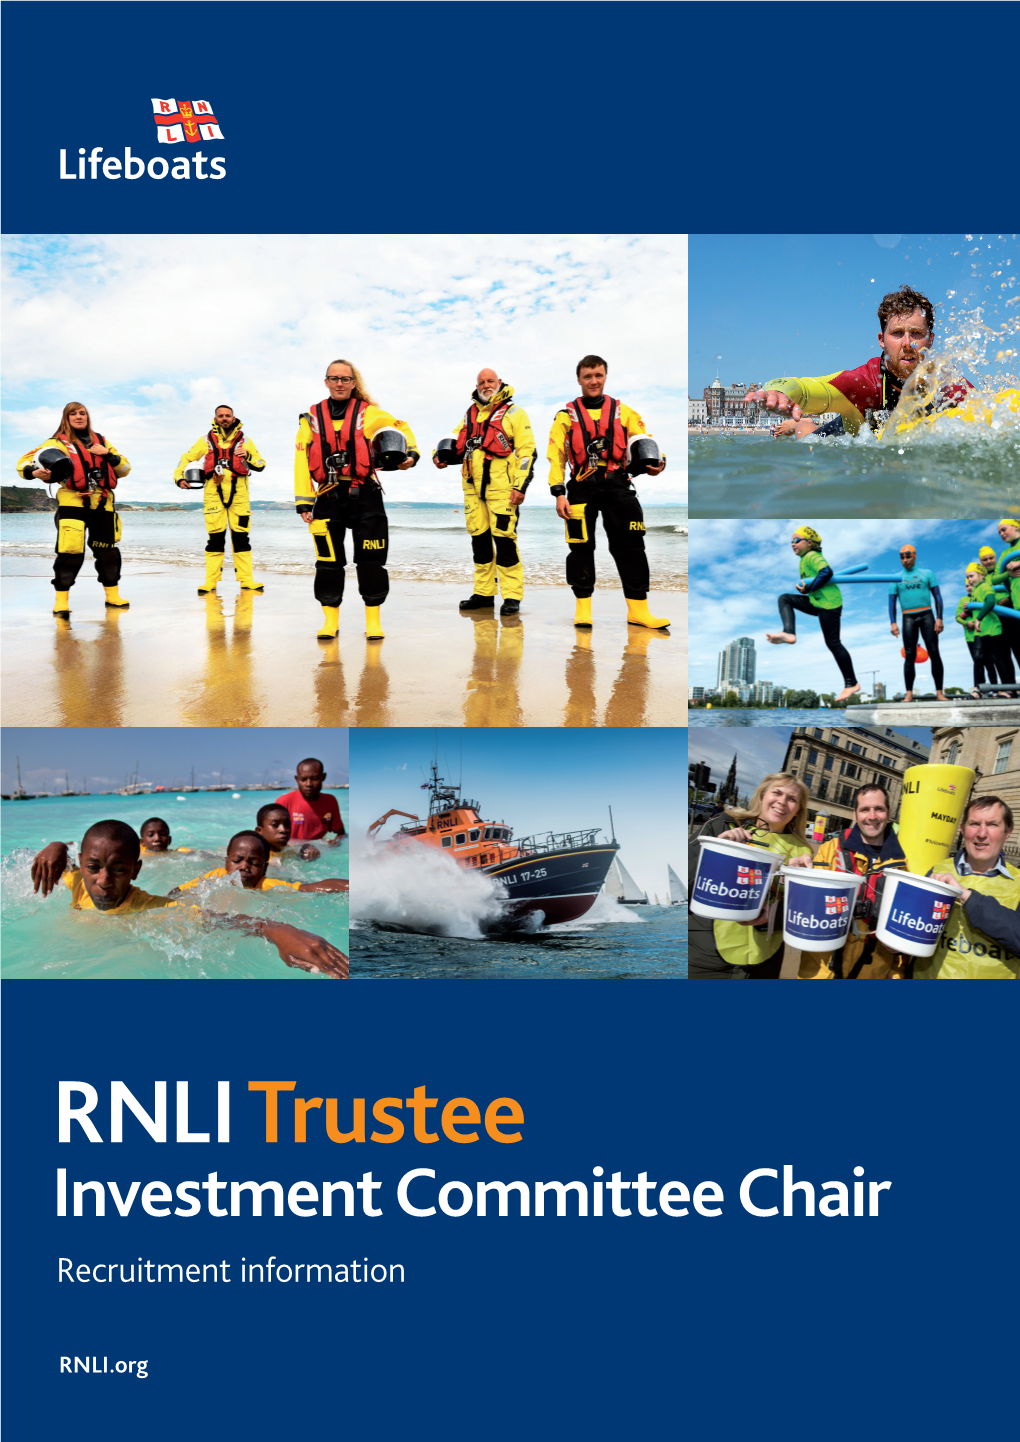 RNLI Trustee Investment Committee Chair Recruitment Information